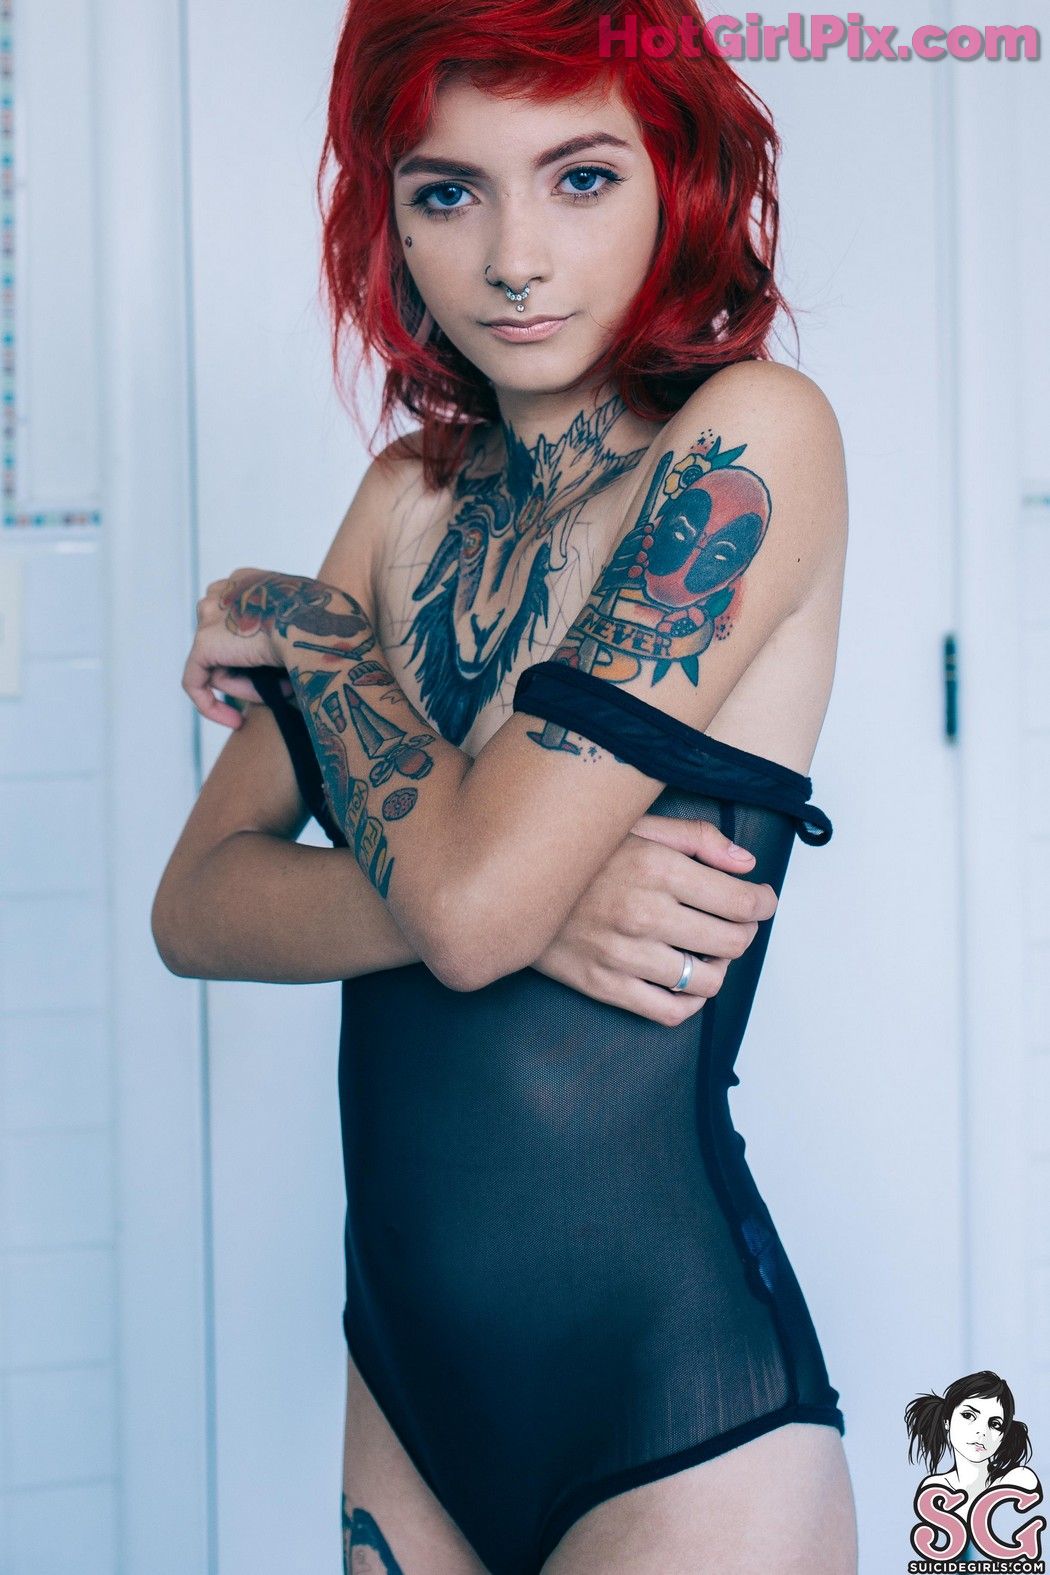 [Suicide Girls] Ellqvist - My Very First Time